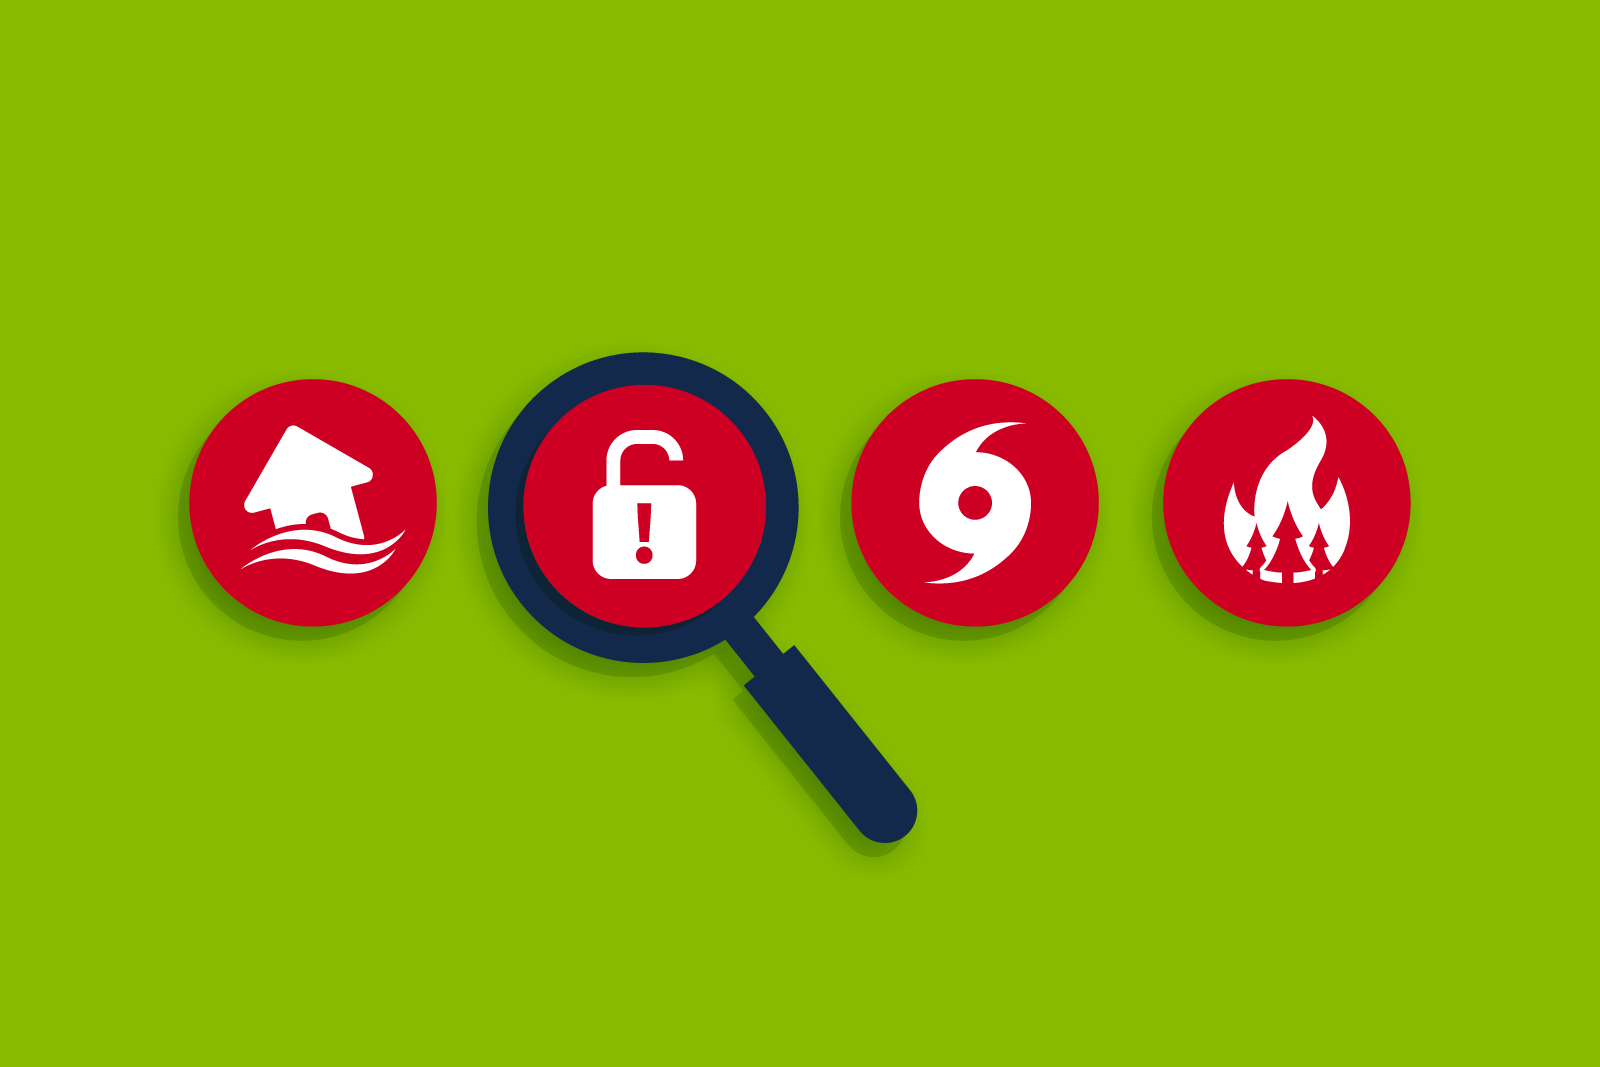 Four red disaster icons on a green background